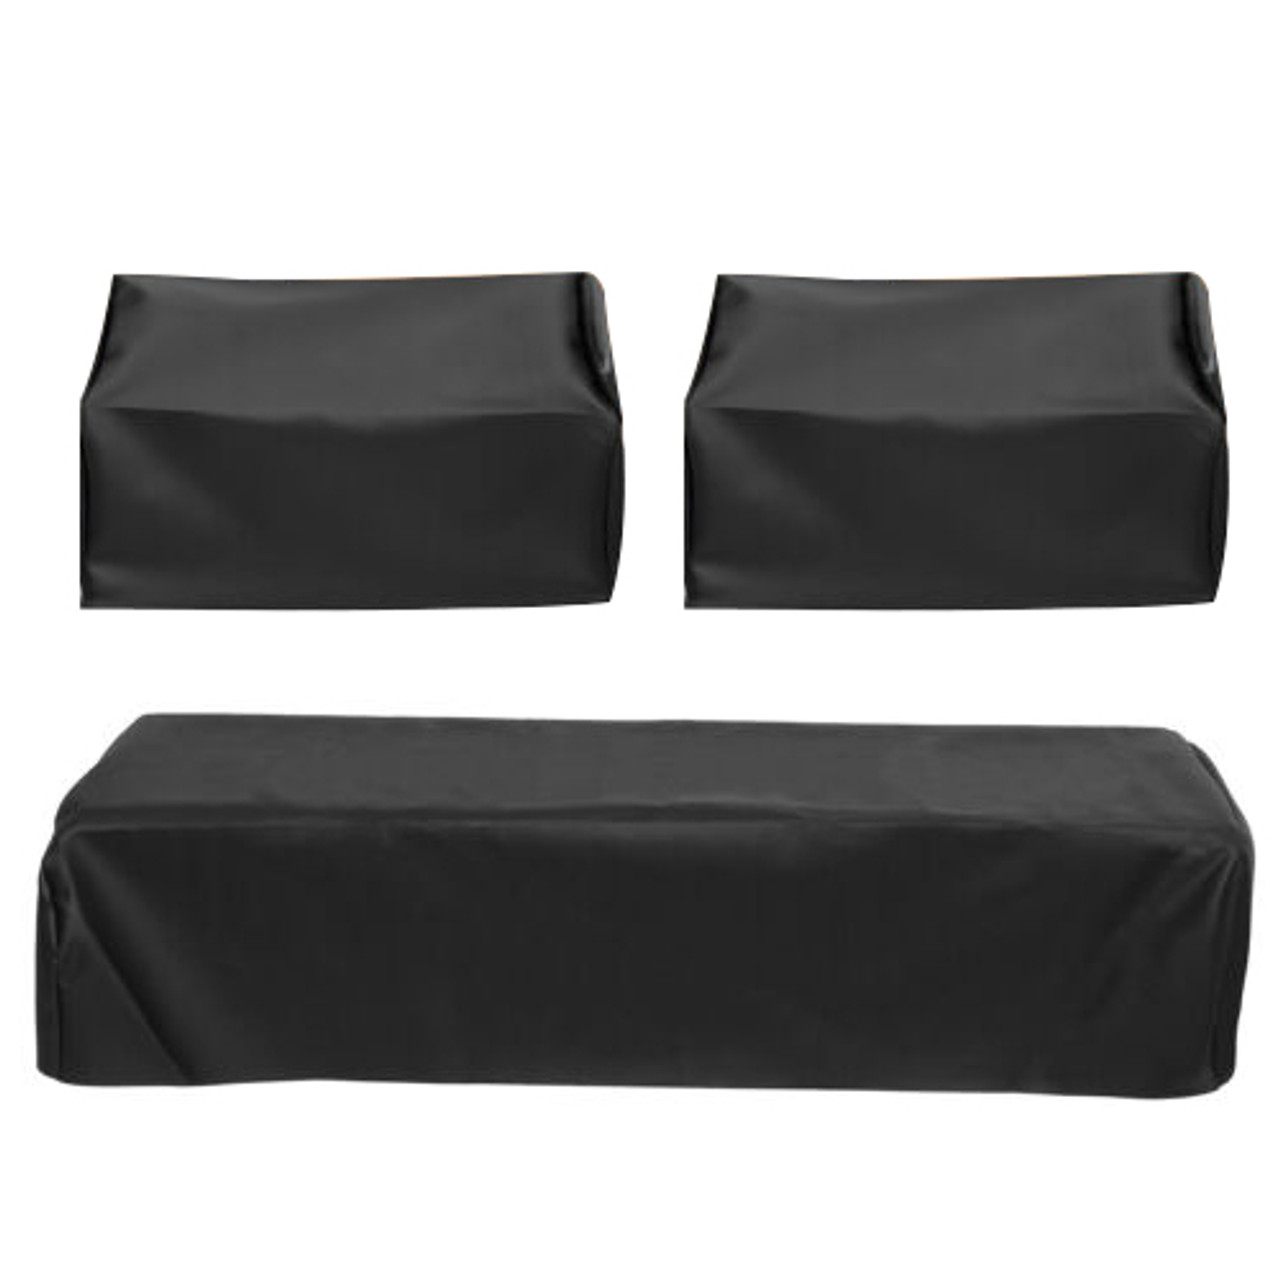 Set Club Car Front Seat Covers Pu Leather Black For Pre-2000 Ds Golf Cart 82-00